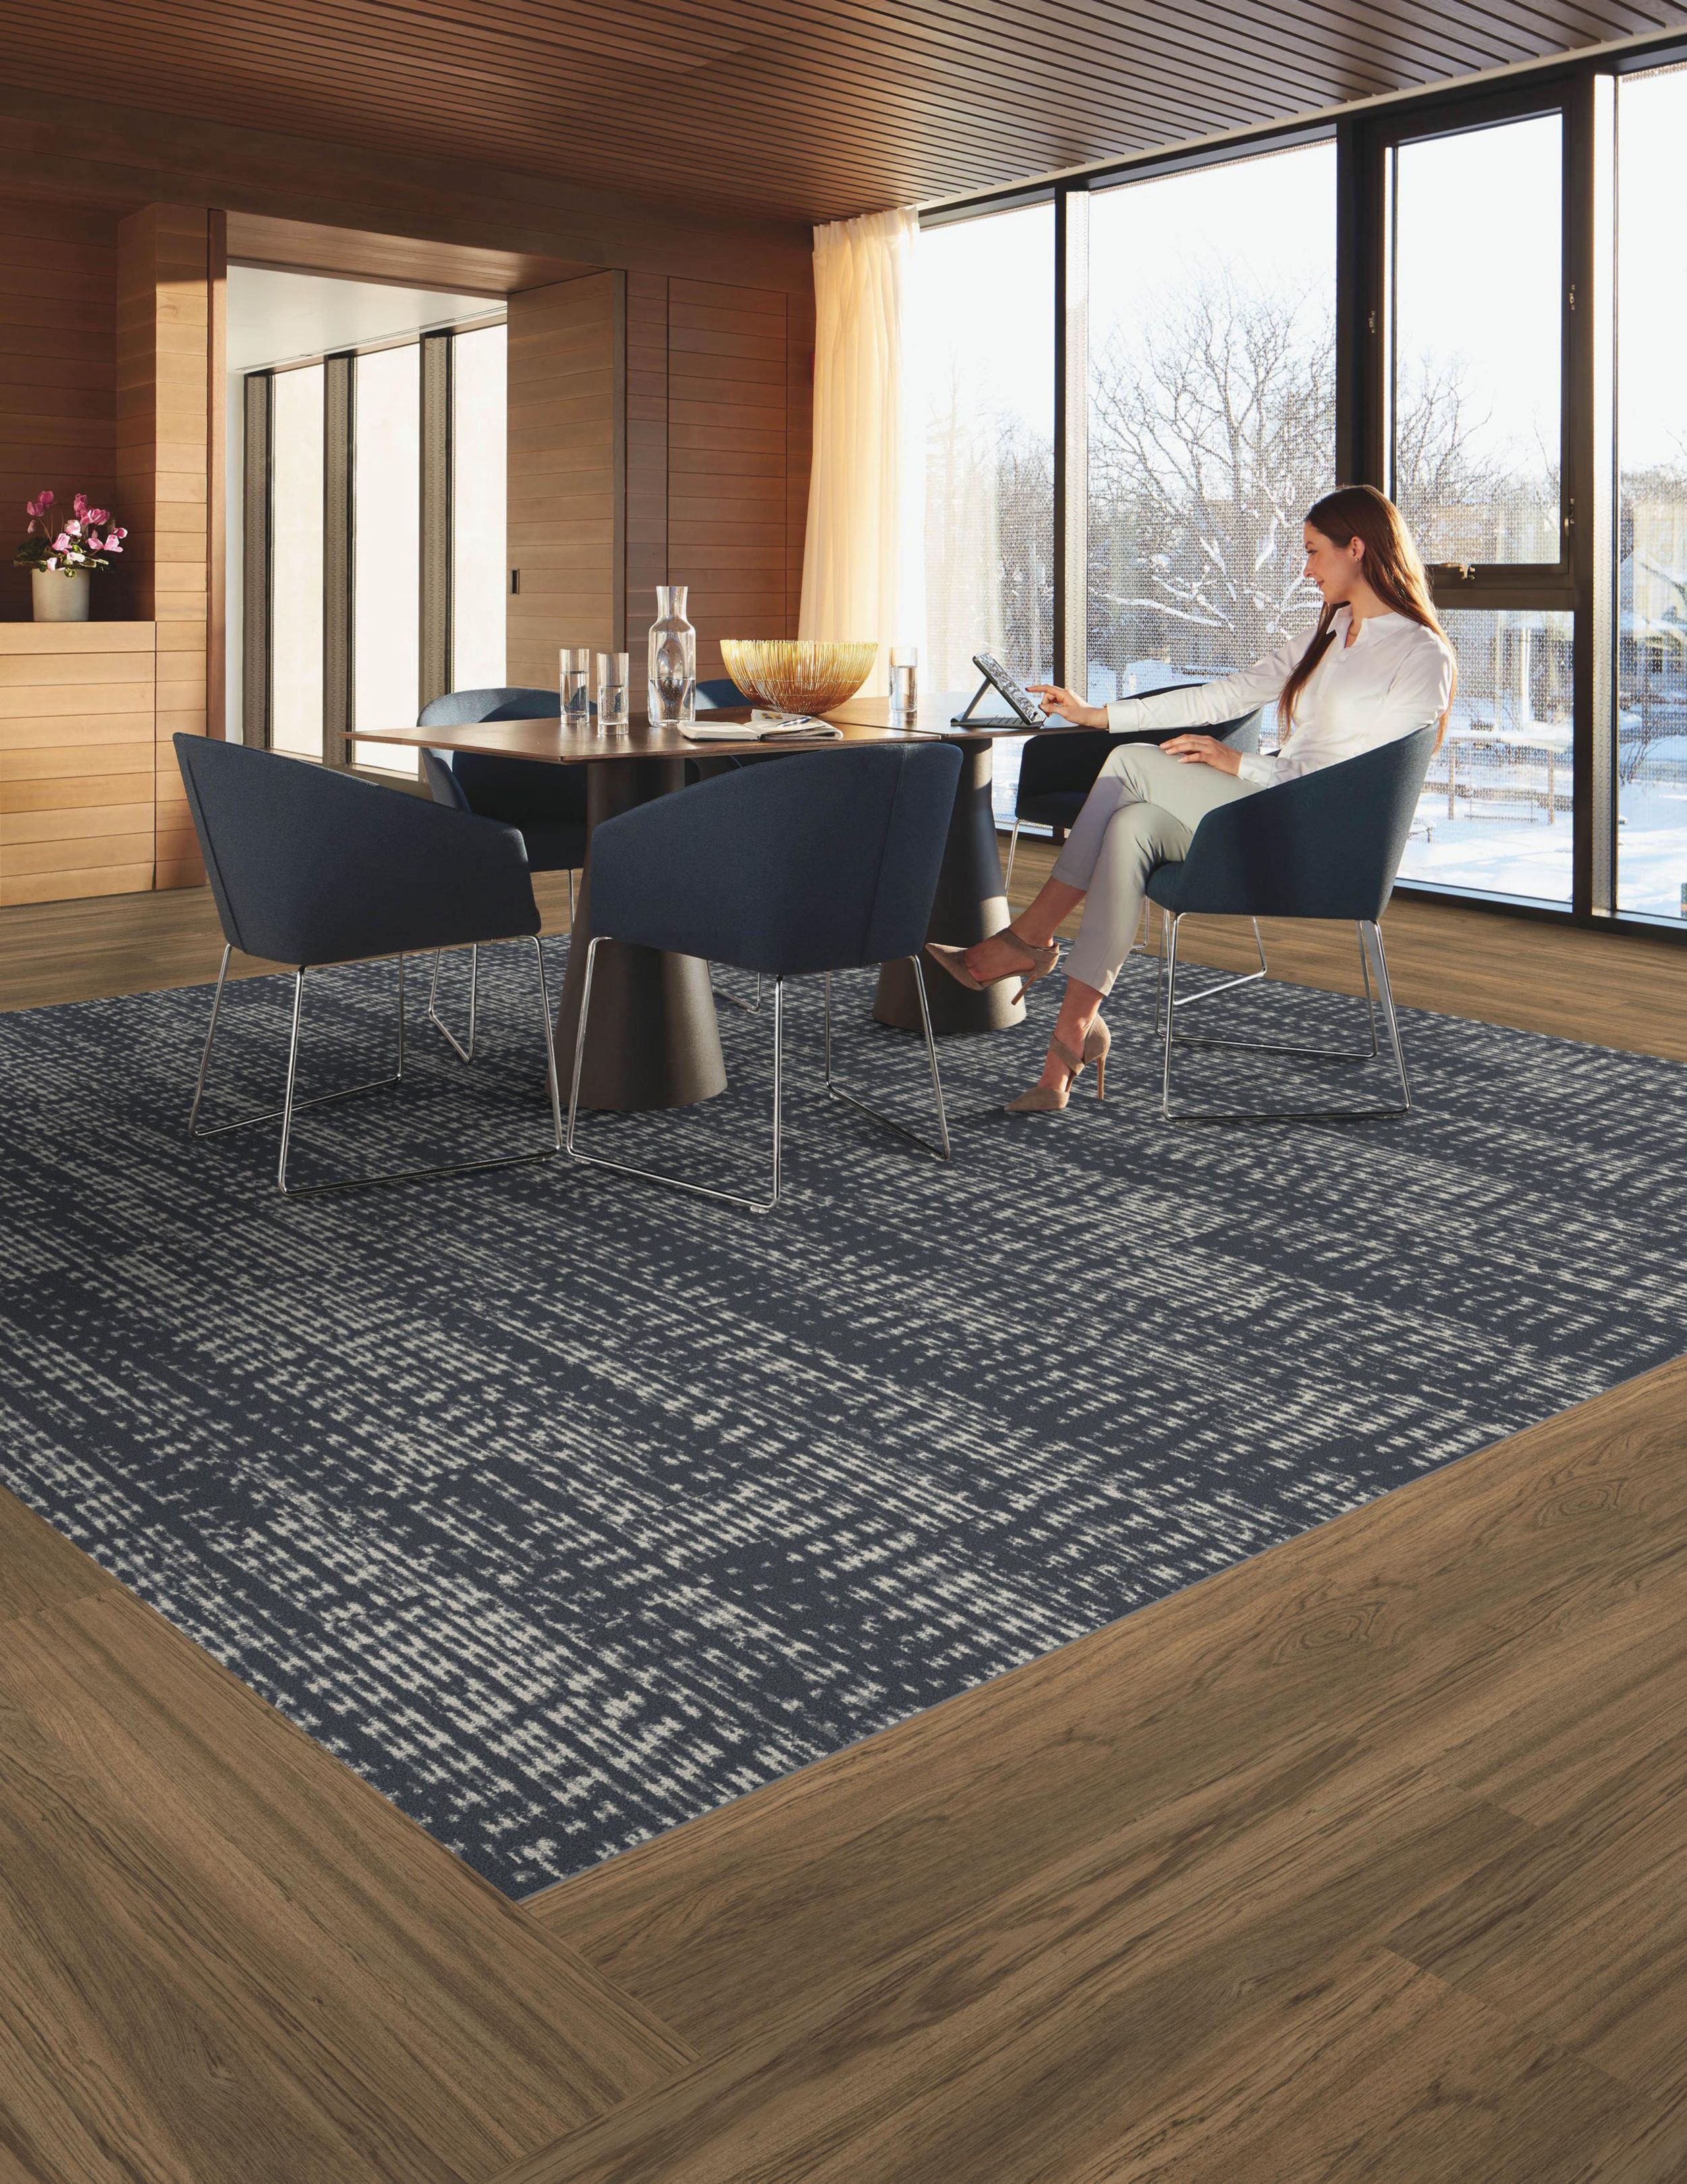 Interface First Edition plank carpet inset as rug into Natural Woodgrains LVT in cafe area with glass walls and wood ceiling imagen número 6